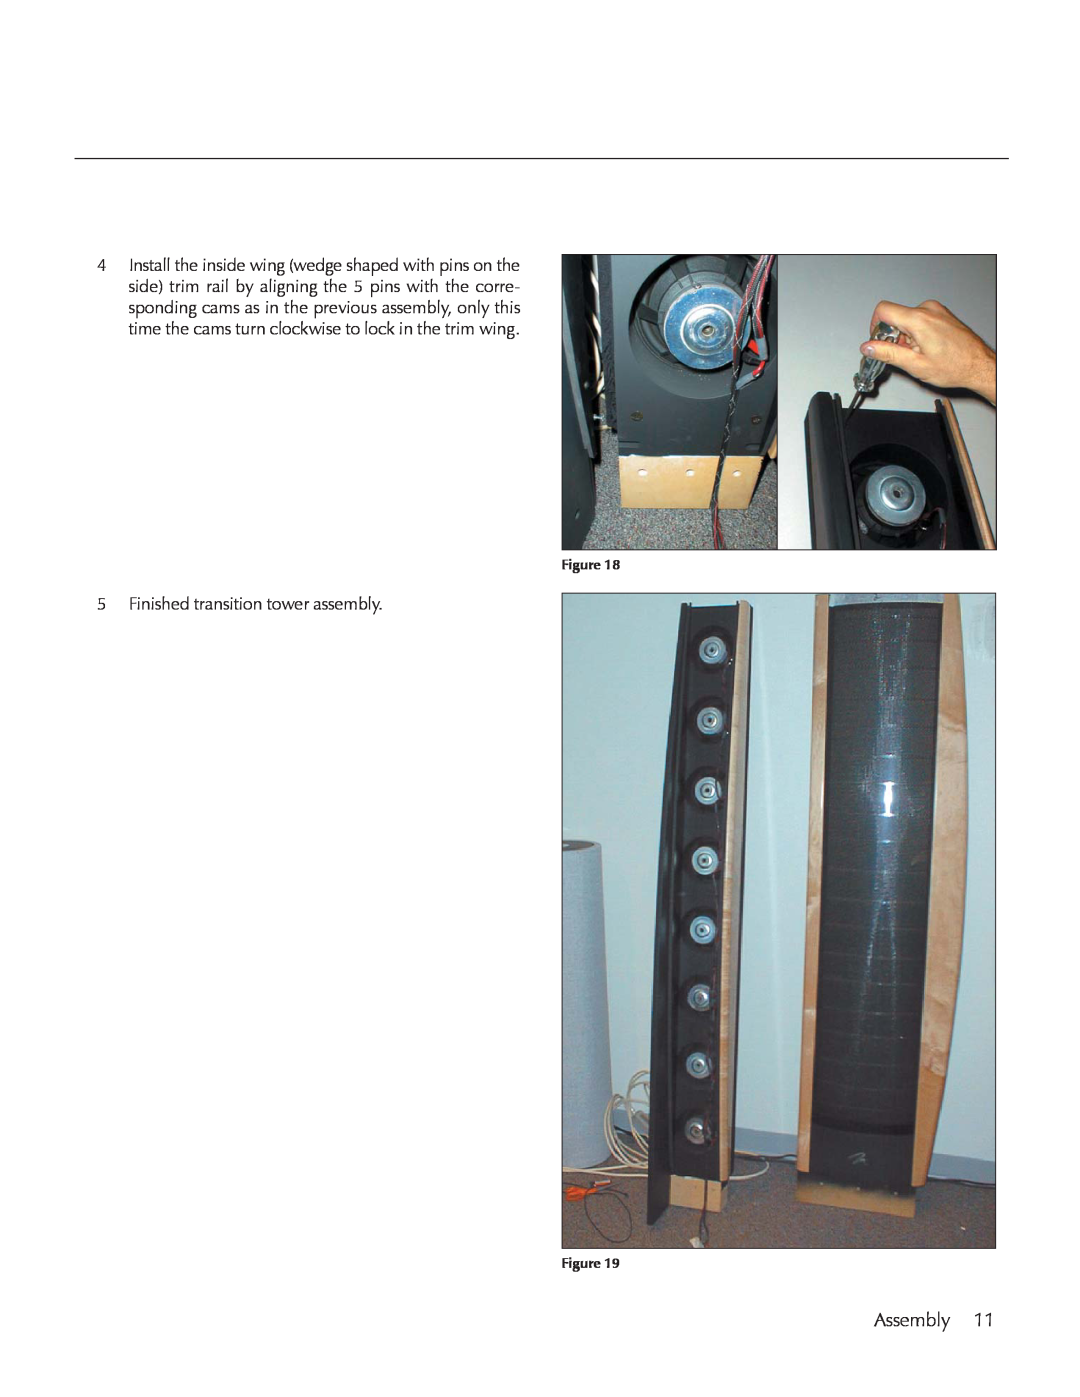 MartinLogan E2 manual Assembly, Finished transition tower assembly, Figure Figure 